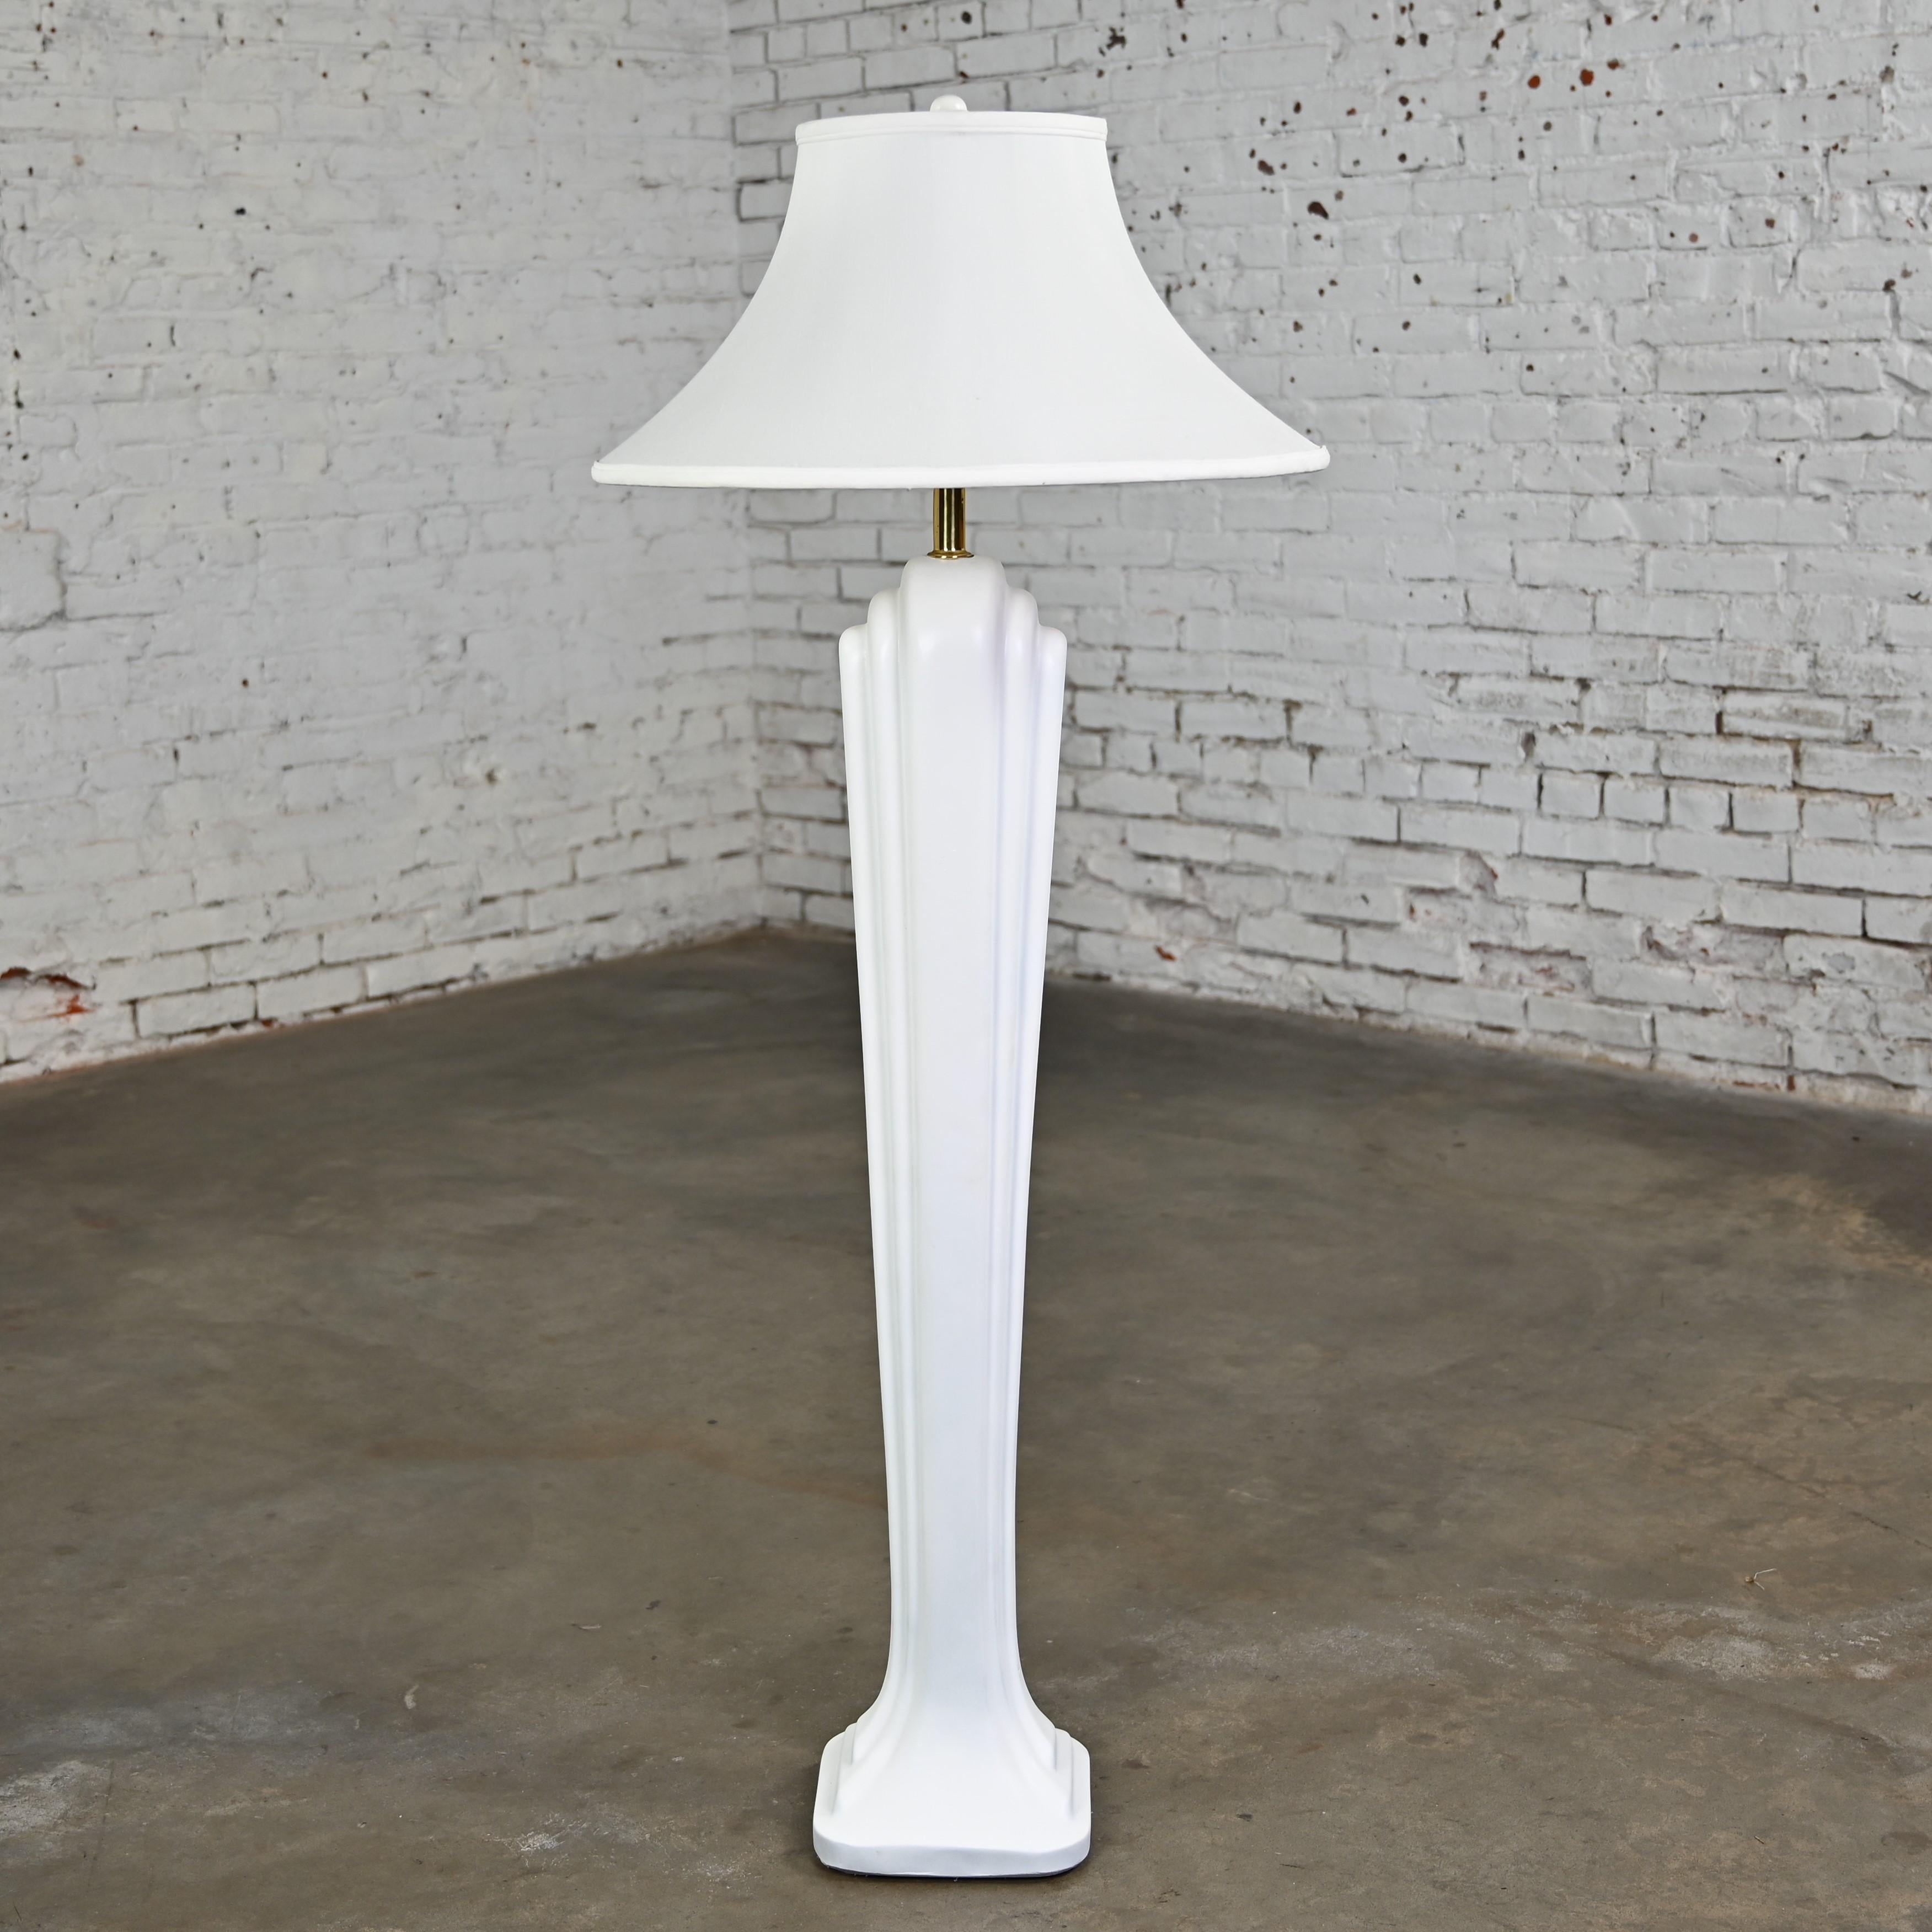 Art Deco Revival to Postmodern Paolo Gucci Floor Lamp White Sculpted Resin  For Sale 12